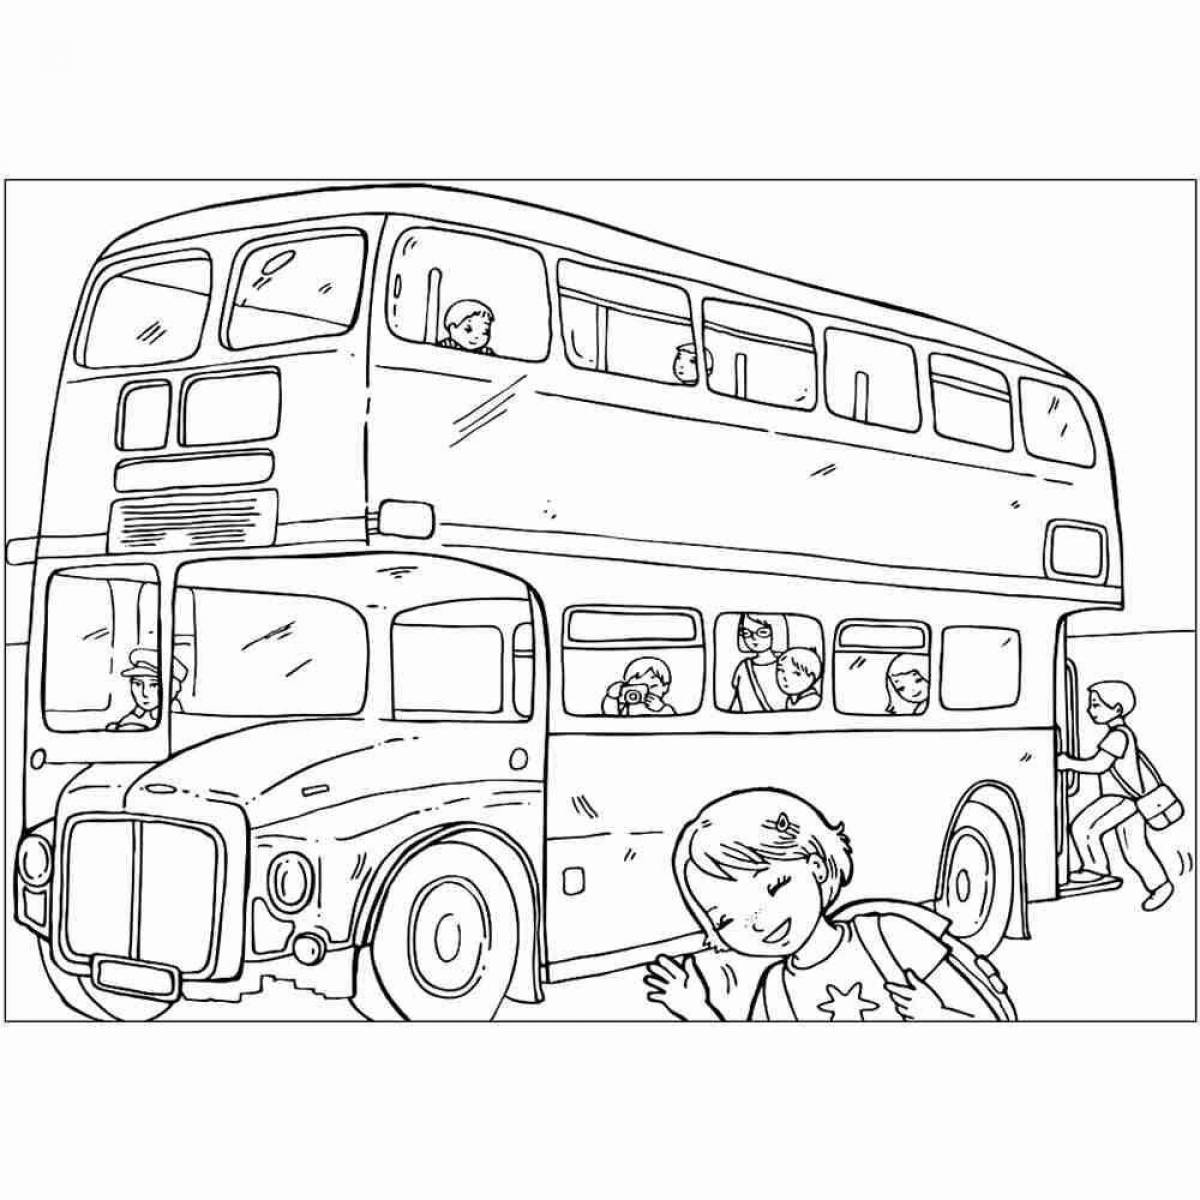 Creative bus coloring book for 6-7 year olds